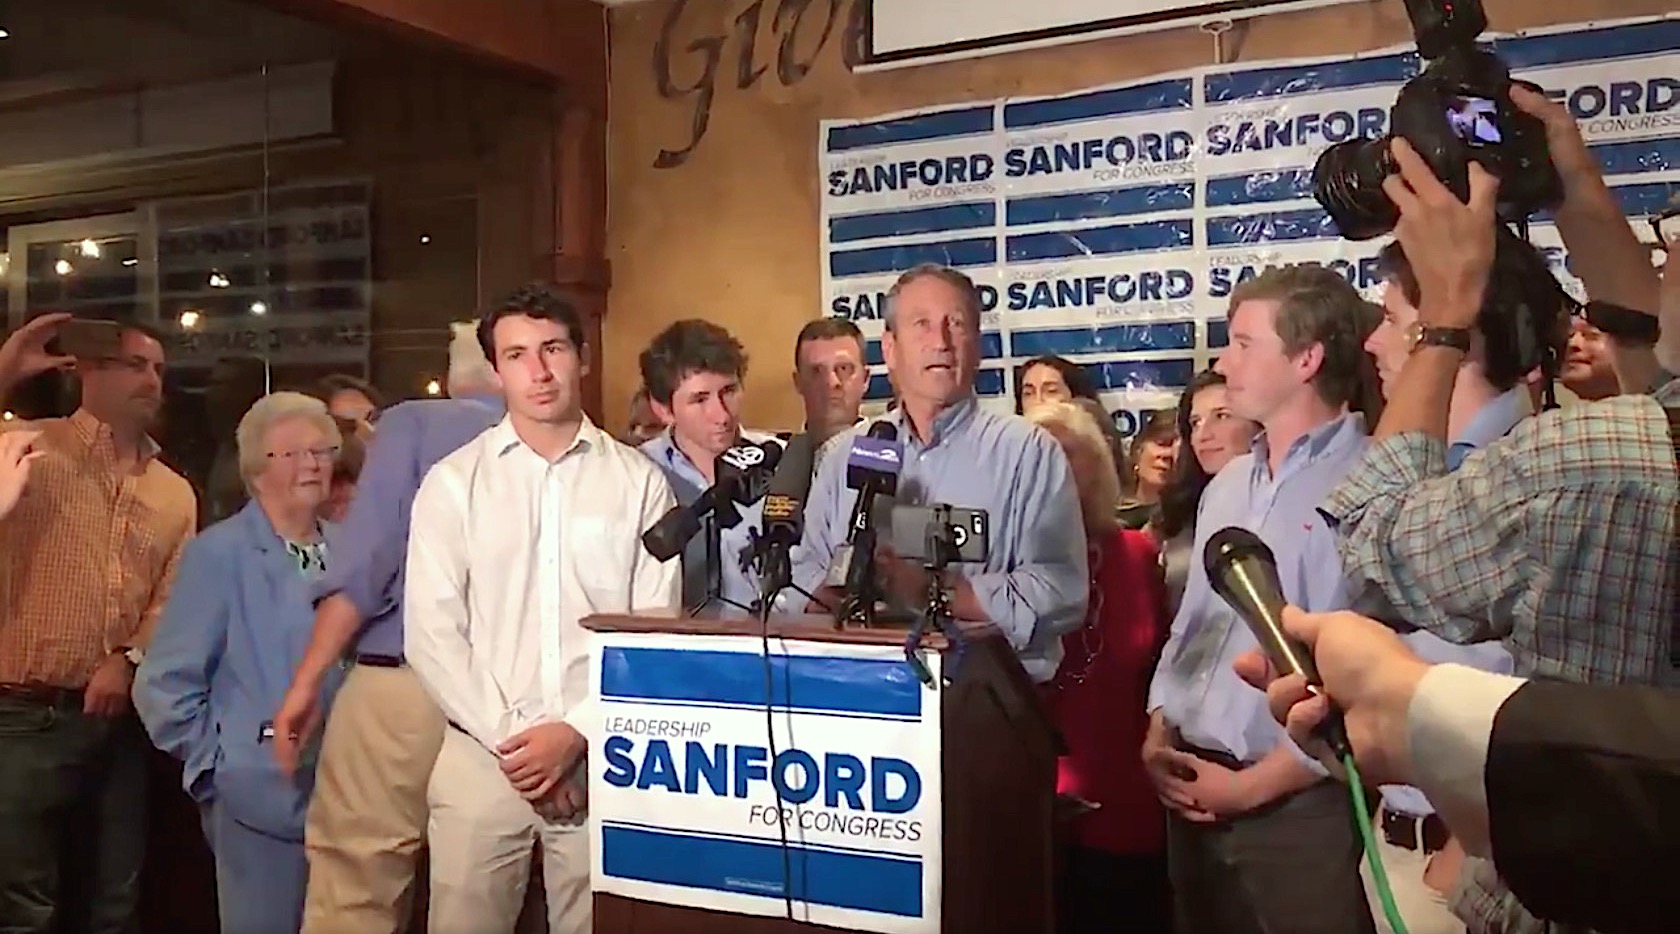 Rep. Mark Sanford unseated in GOP primary